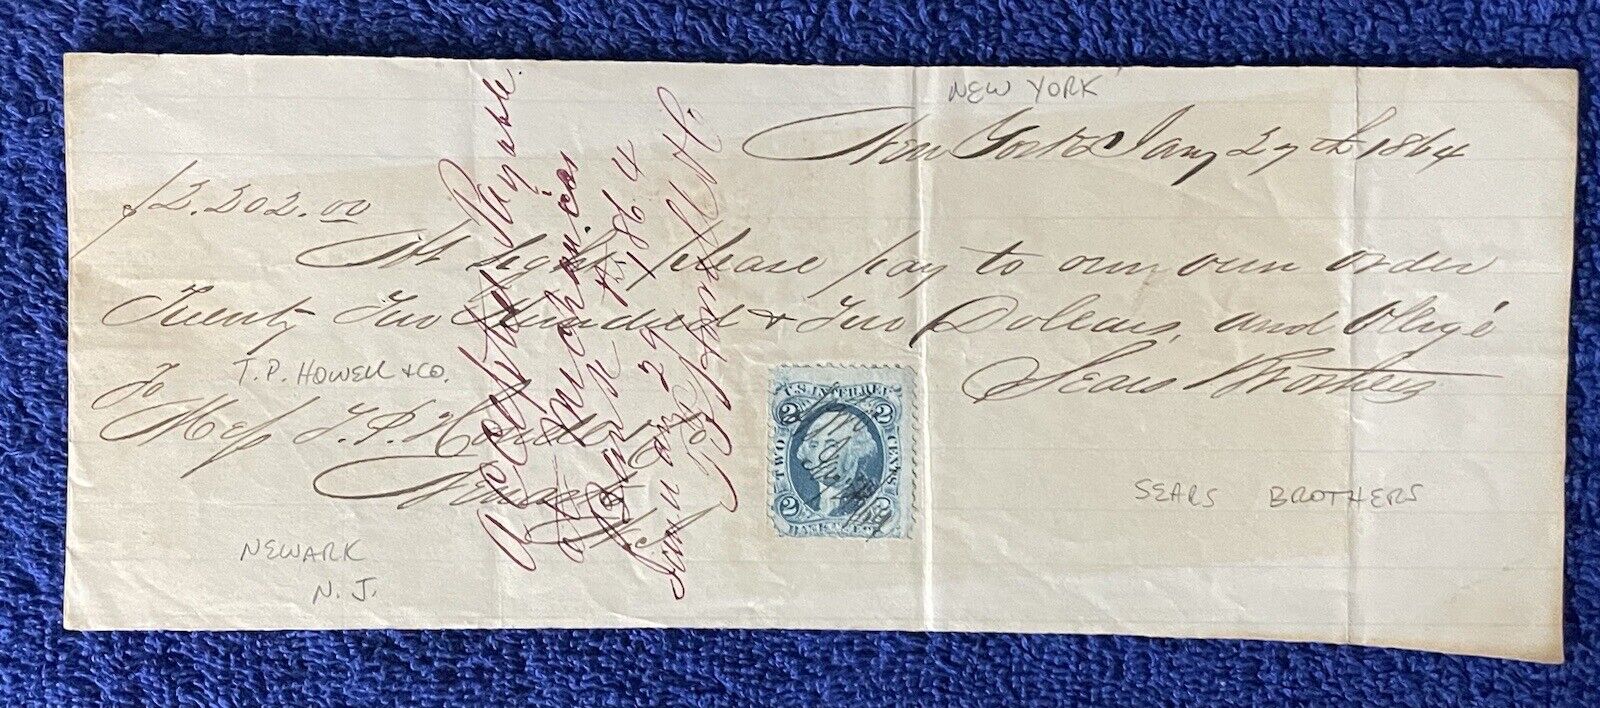 1864 Handwritten check, $2,202 Payable to “Sears Brothers”, w/ Revenue Stamp